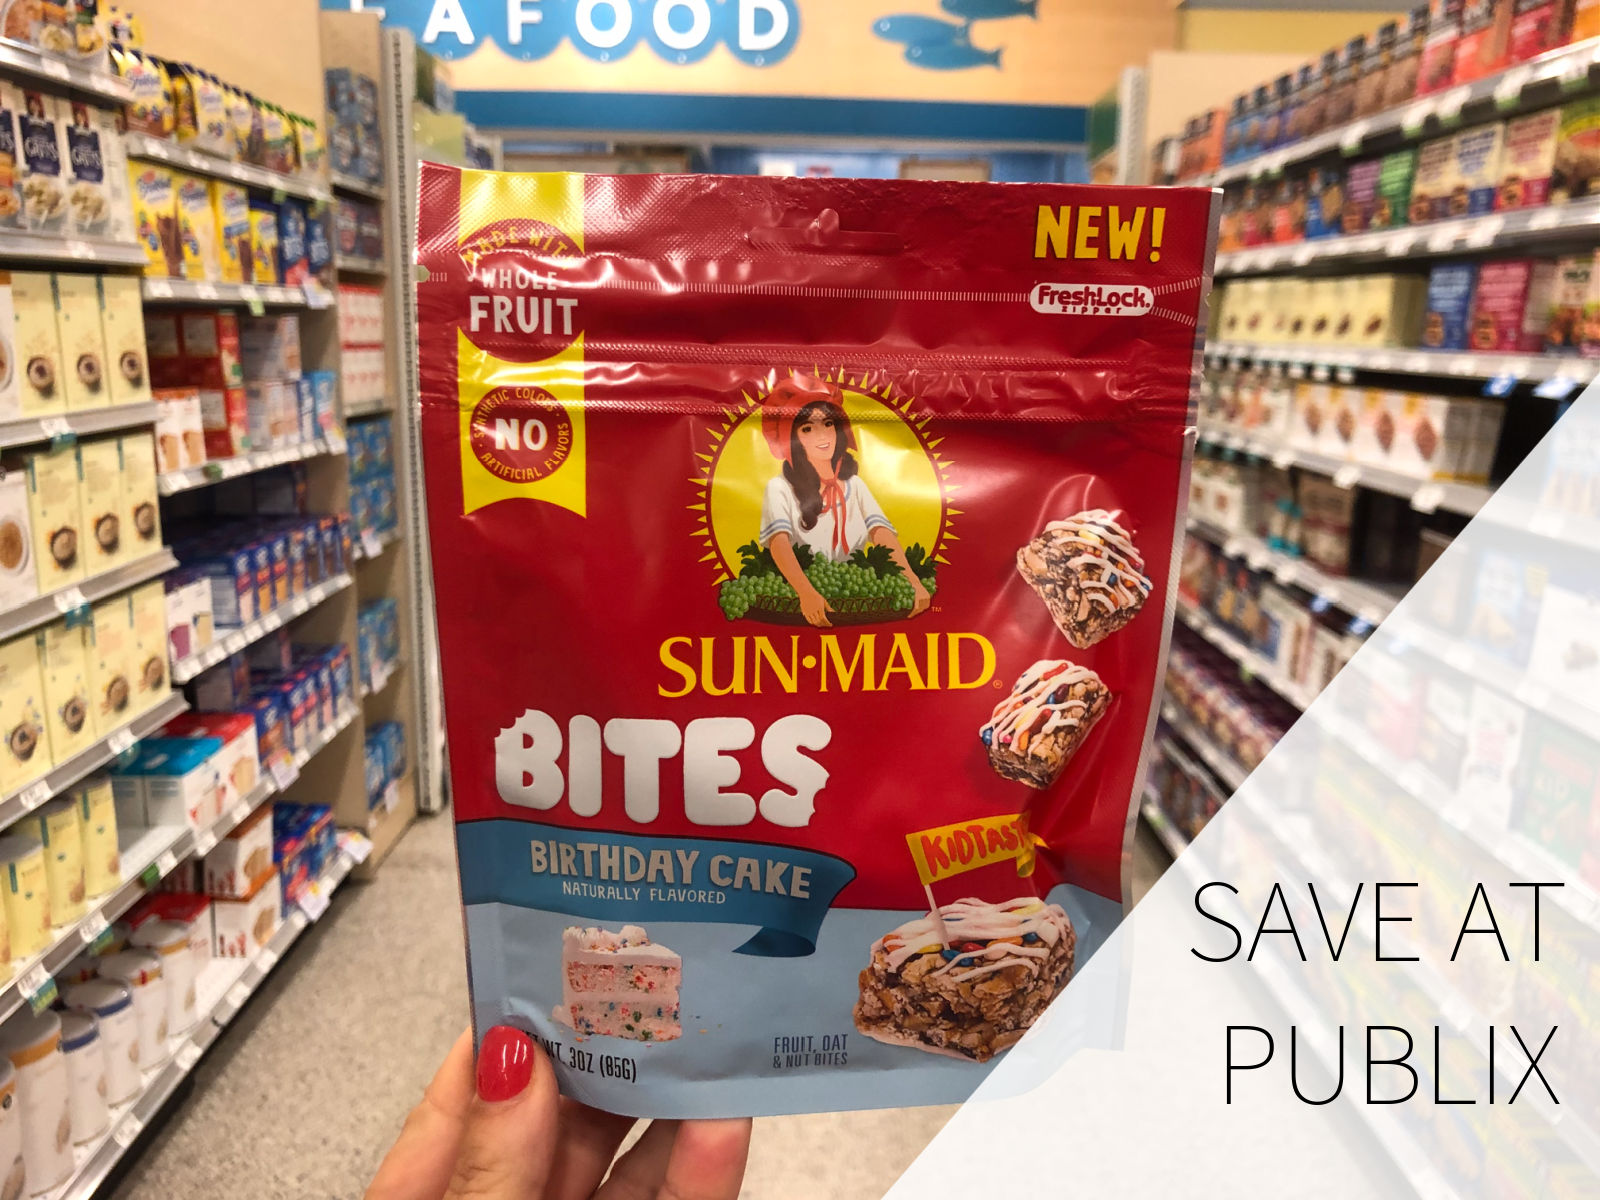 Try New Sun-Maid Bites At A HUGE Discount + A Giveaway (Four Readers Will Win A $50 Publix Gift Card) on I Heart Publix